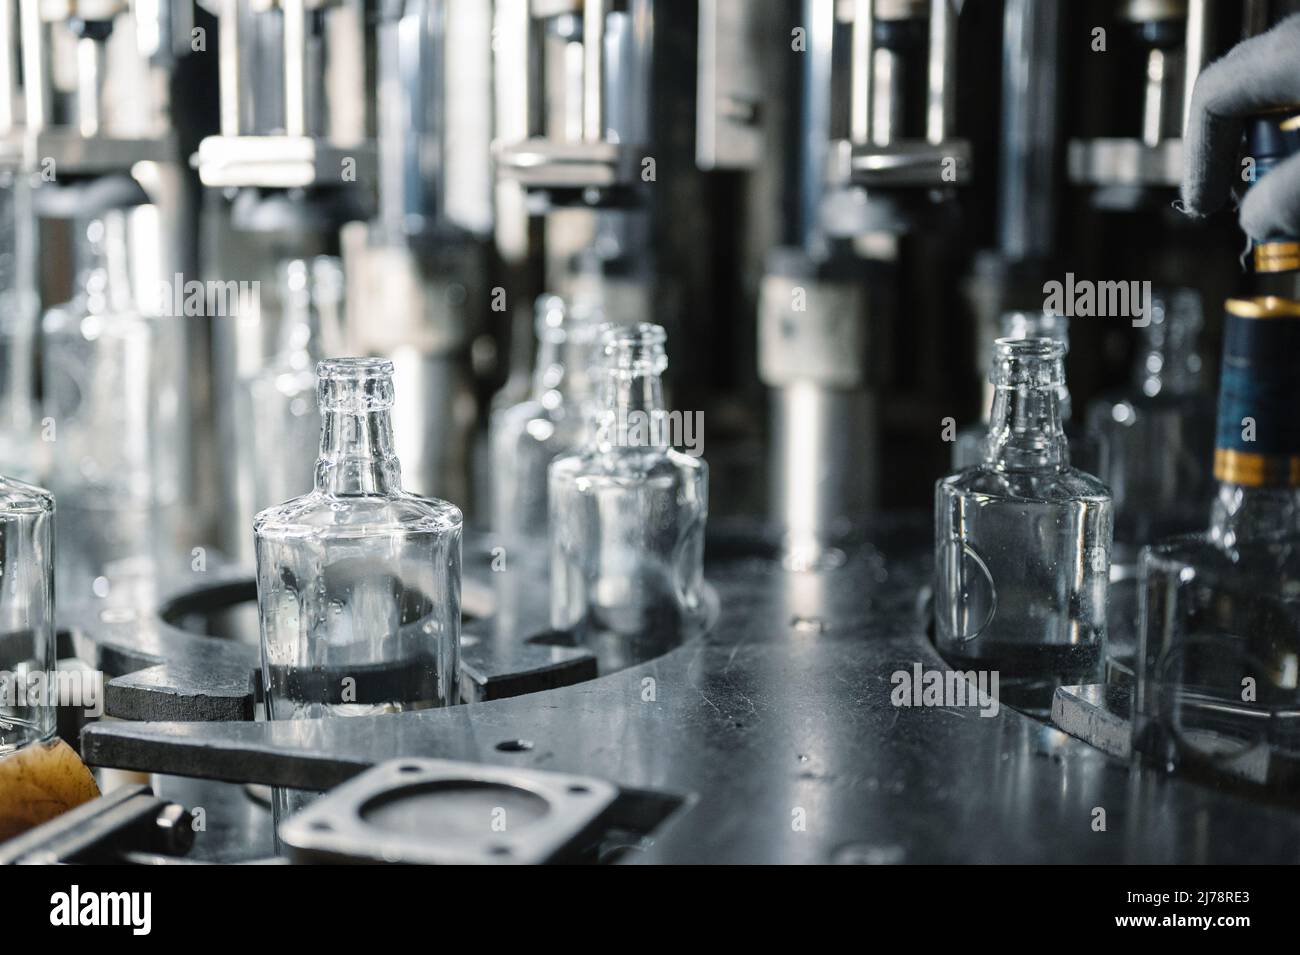 Filling glass bottles with liquid. Stock Photo